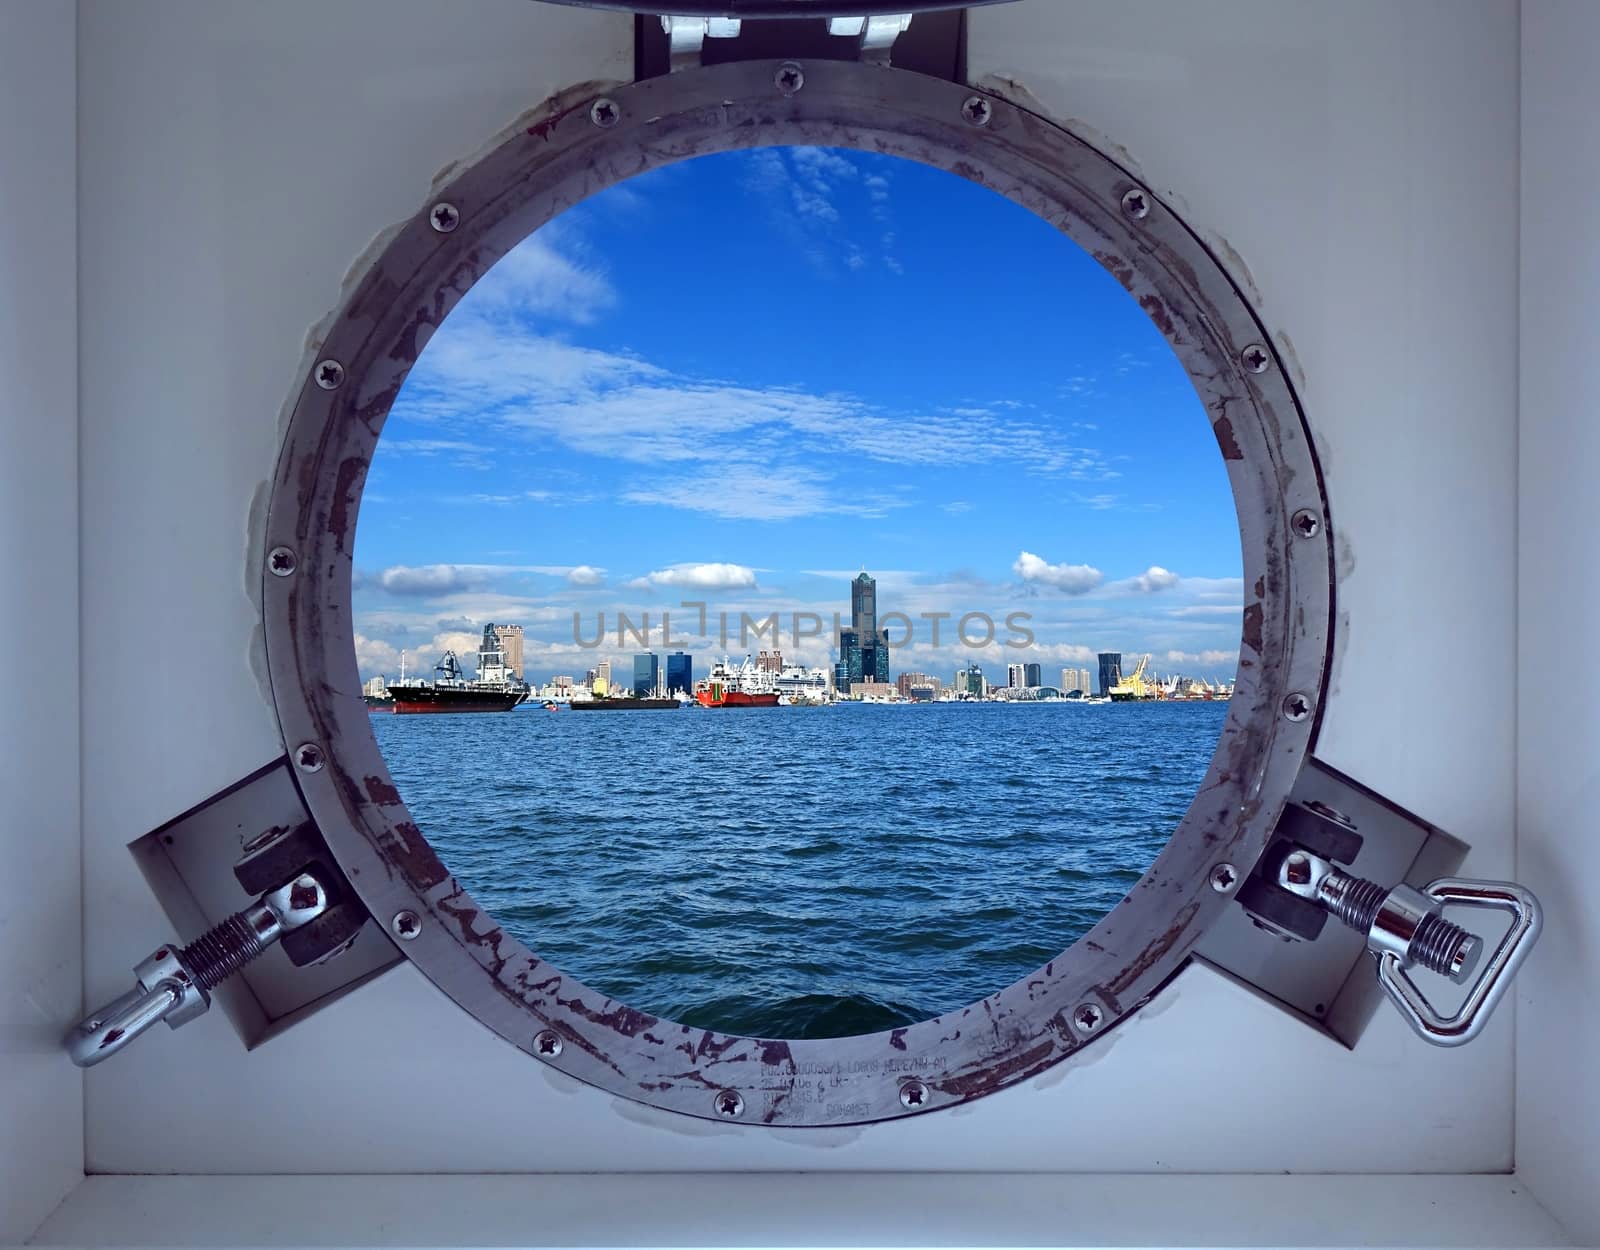 Porthole view of Kaohsiung Harbor and skyline on a bright summer day